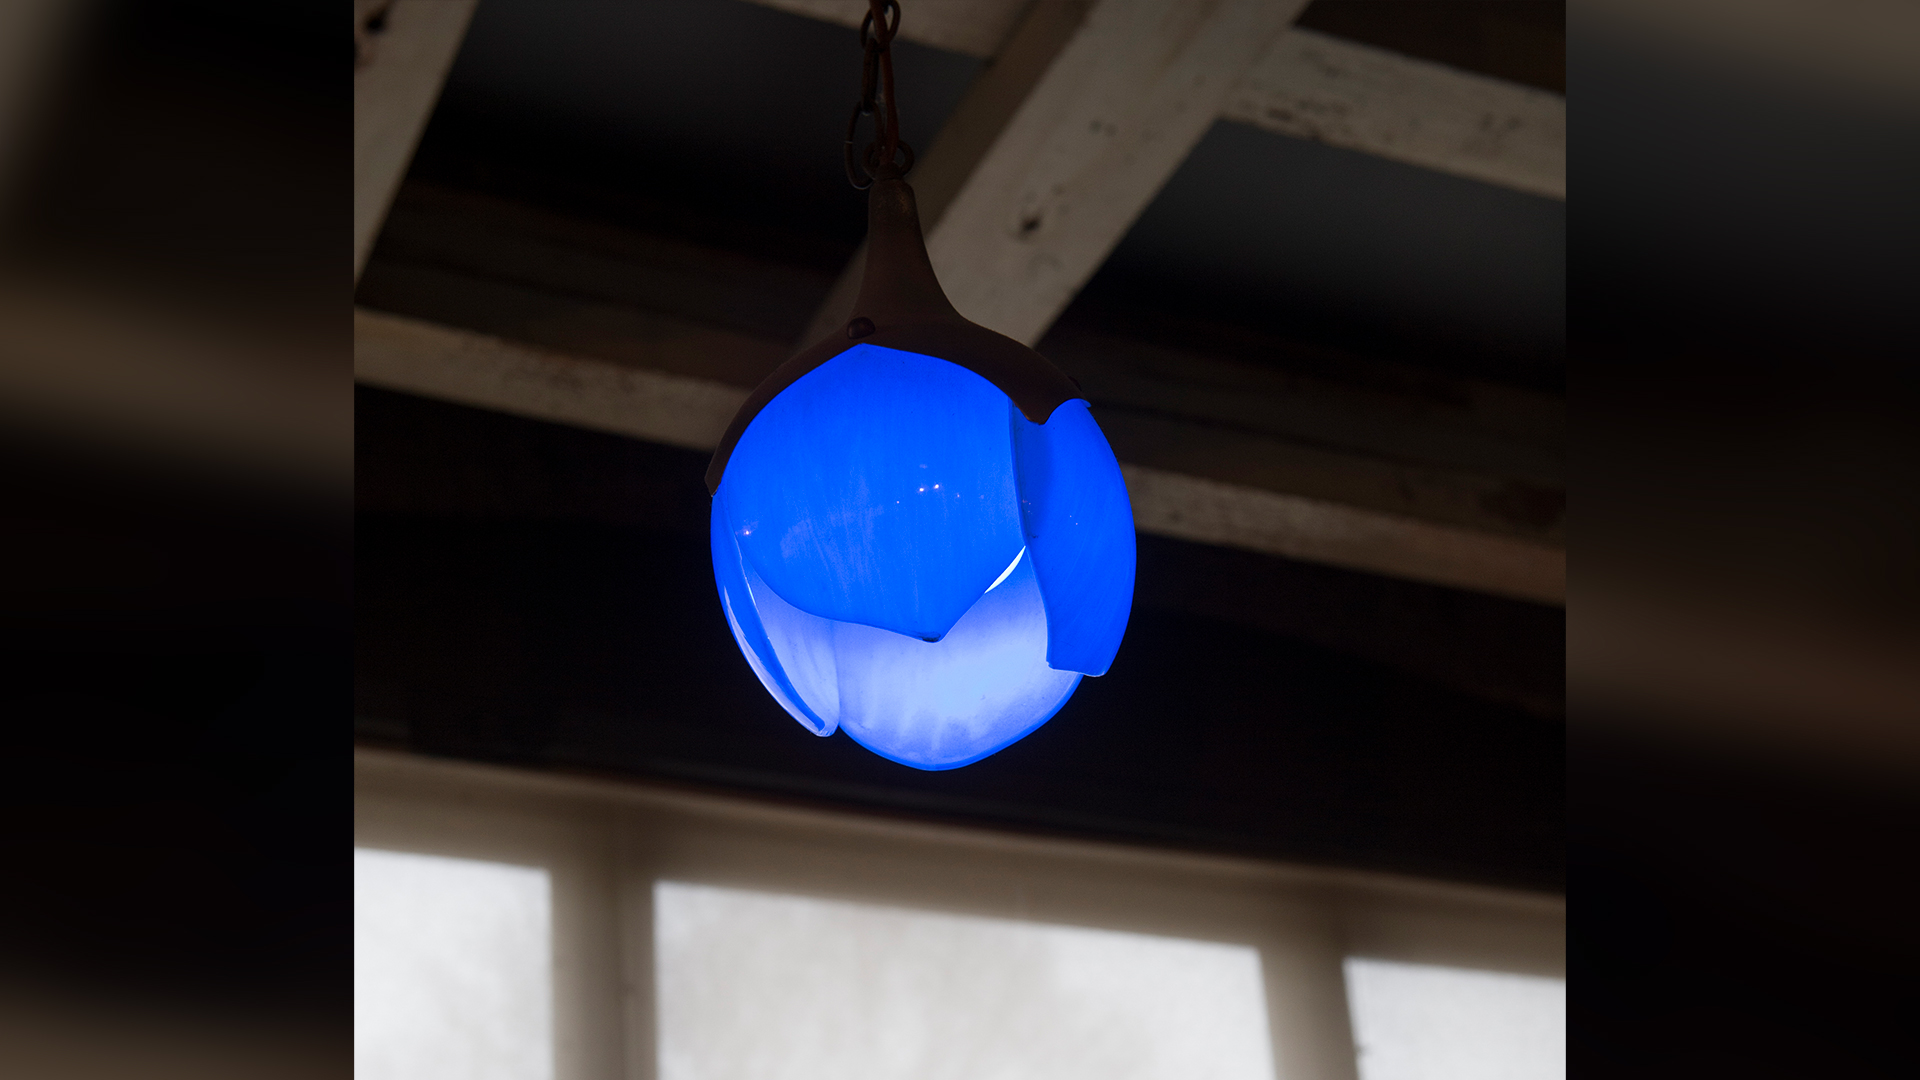 Blue light fixture hanging from ceiling shaped like bud with 4 overlapping petals